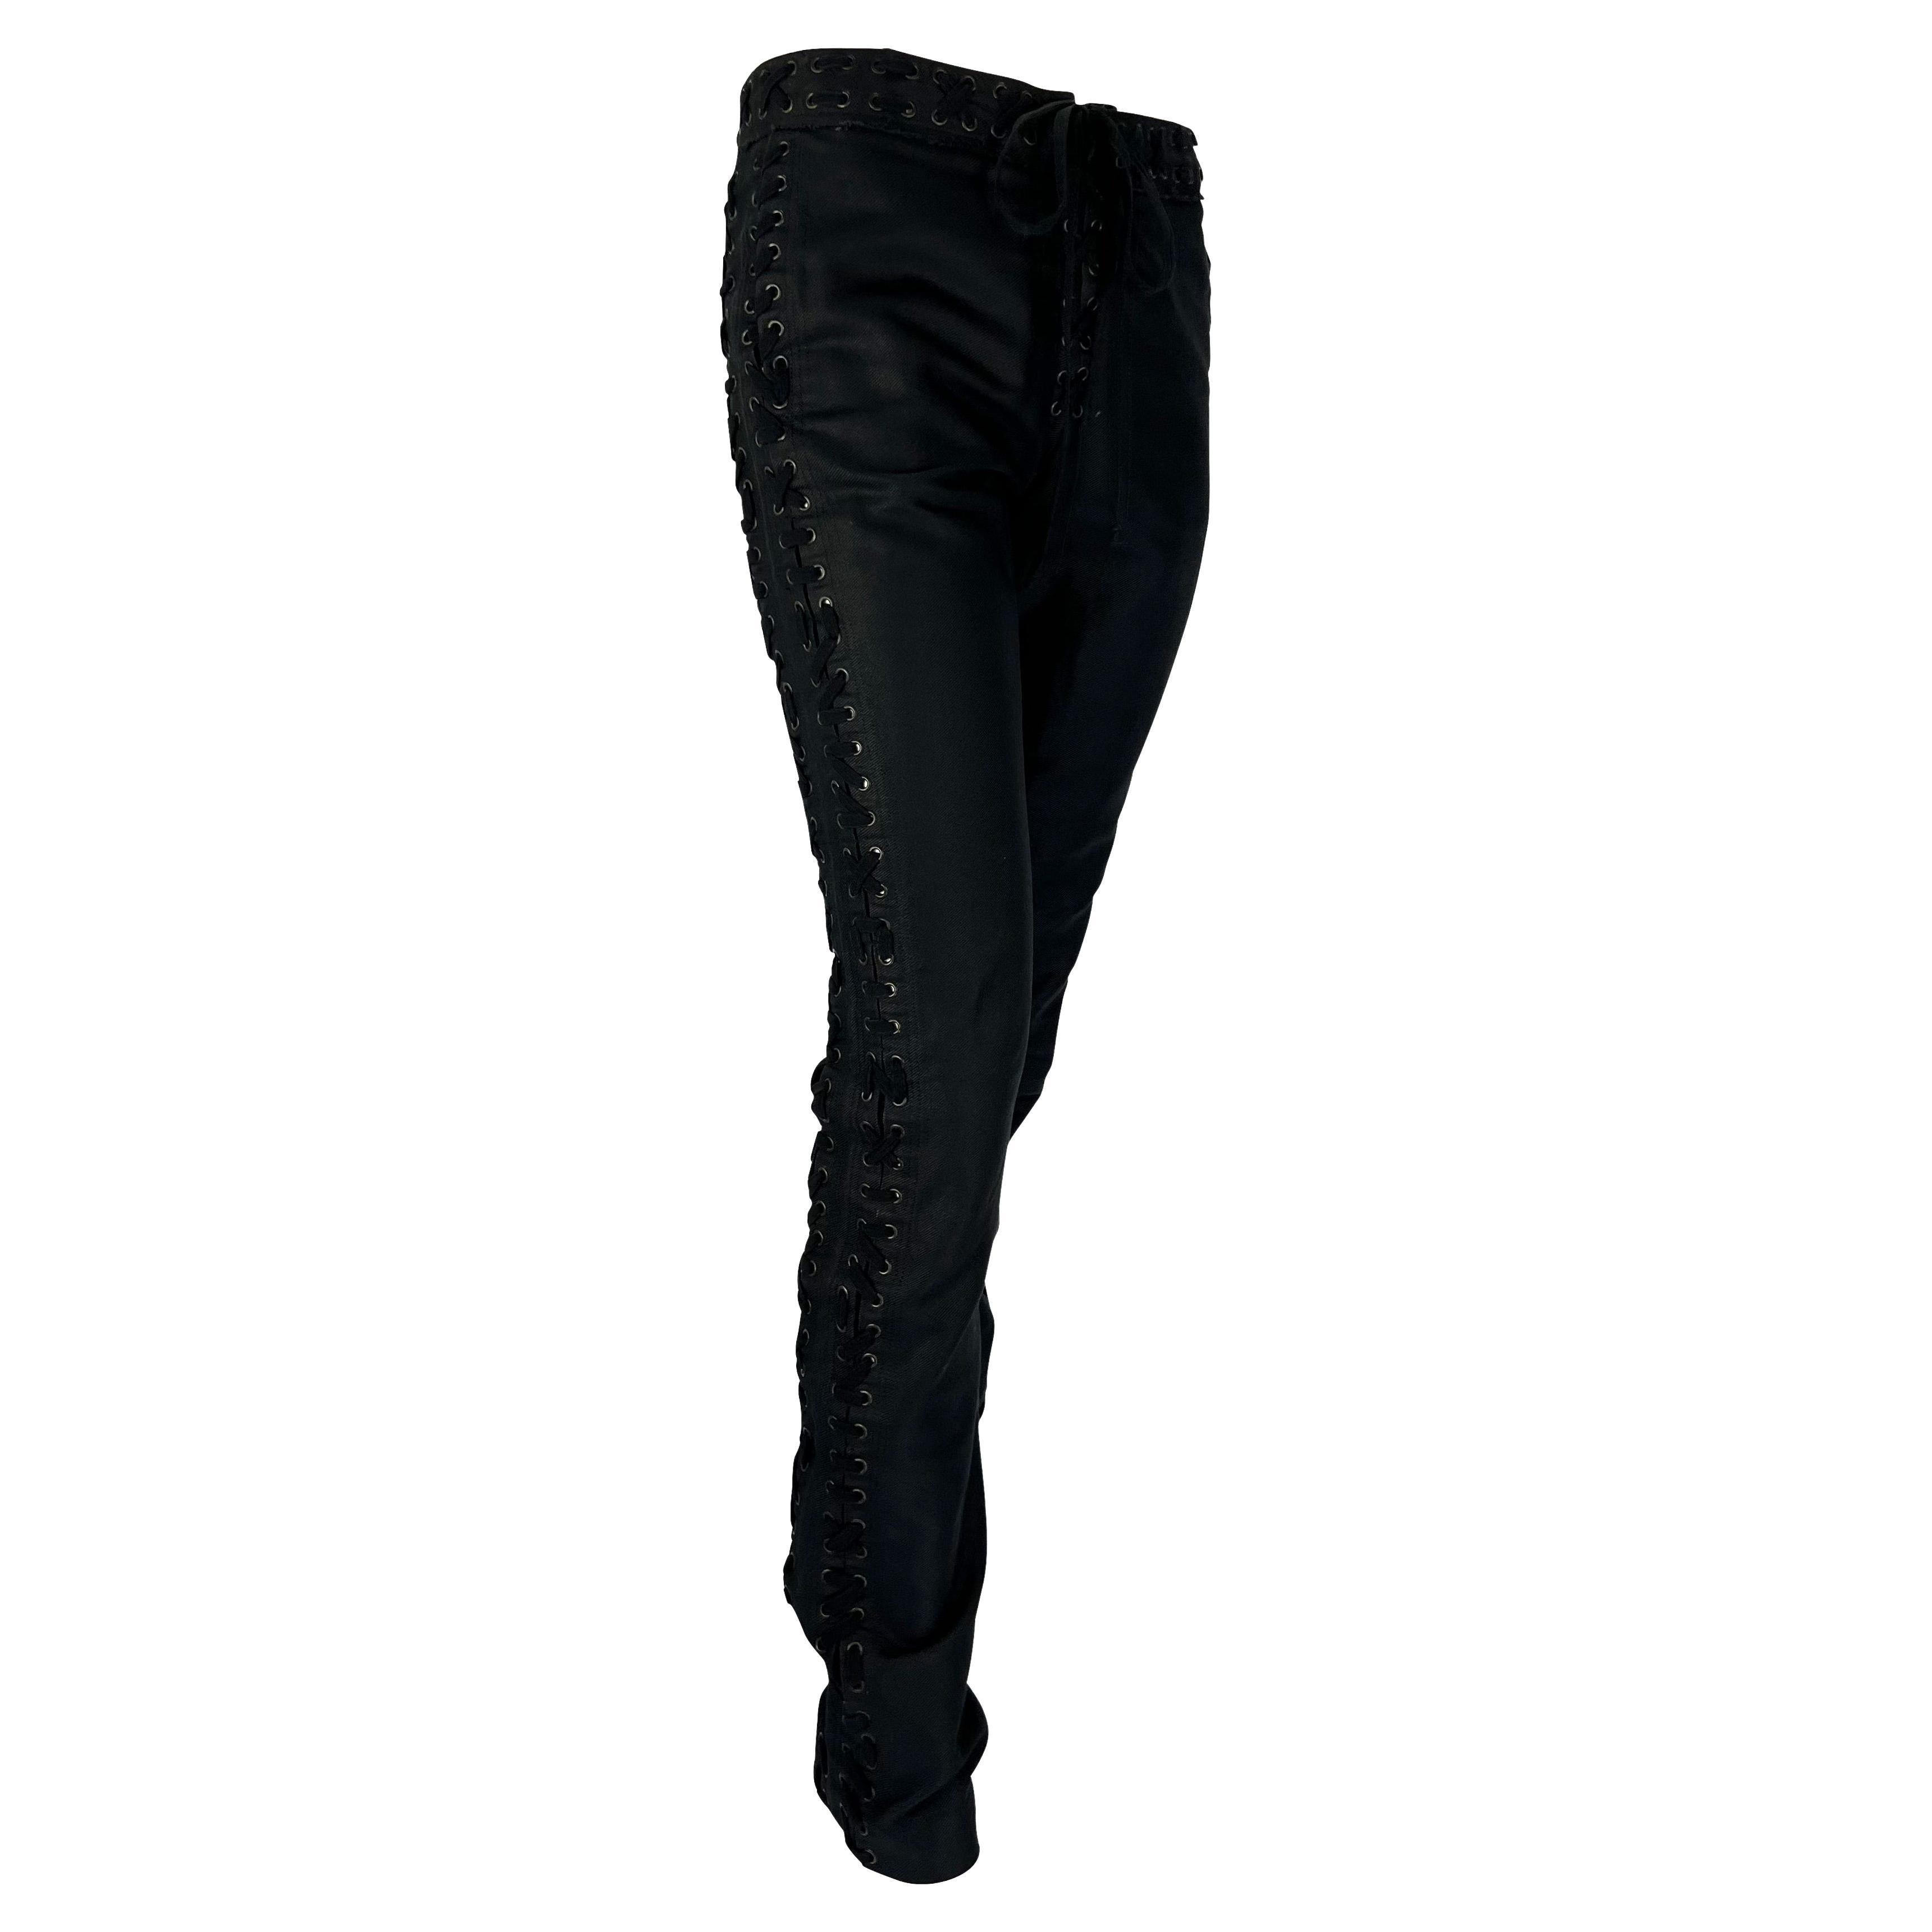 Presenting a pair of lace-up Yves Saint Laurent Rive Gauche pants, designed by Tom Ford. From the Spring/Summer 2002 Safari collection, these black pants feature lace details on both sides, at the waist, and crotch. Many looks on the season's runway